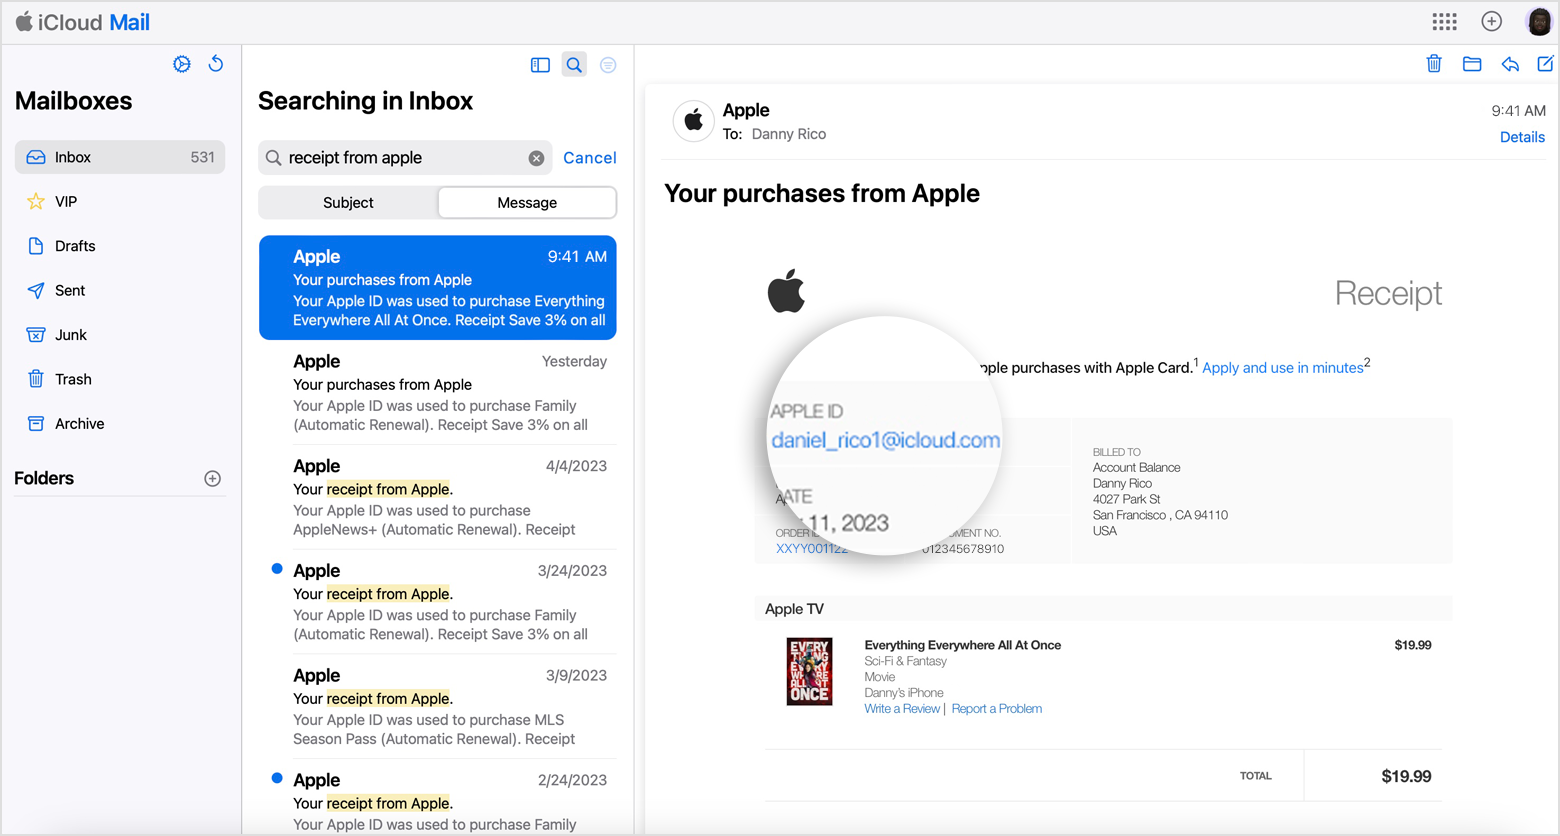 Email receipt that shows the Apple ID that was used for a purchase from Apple.